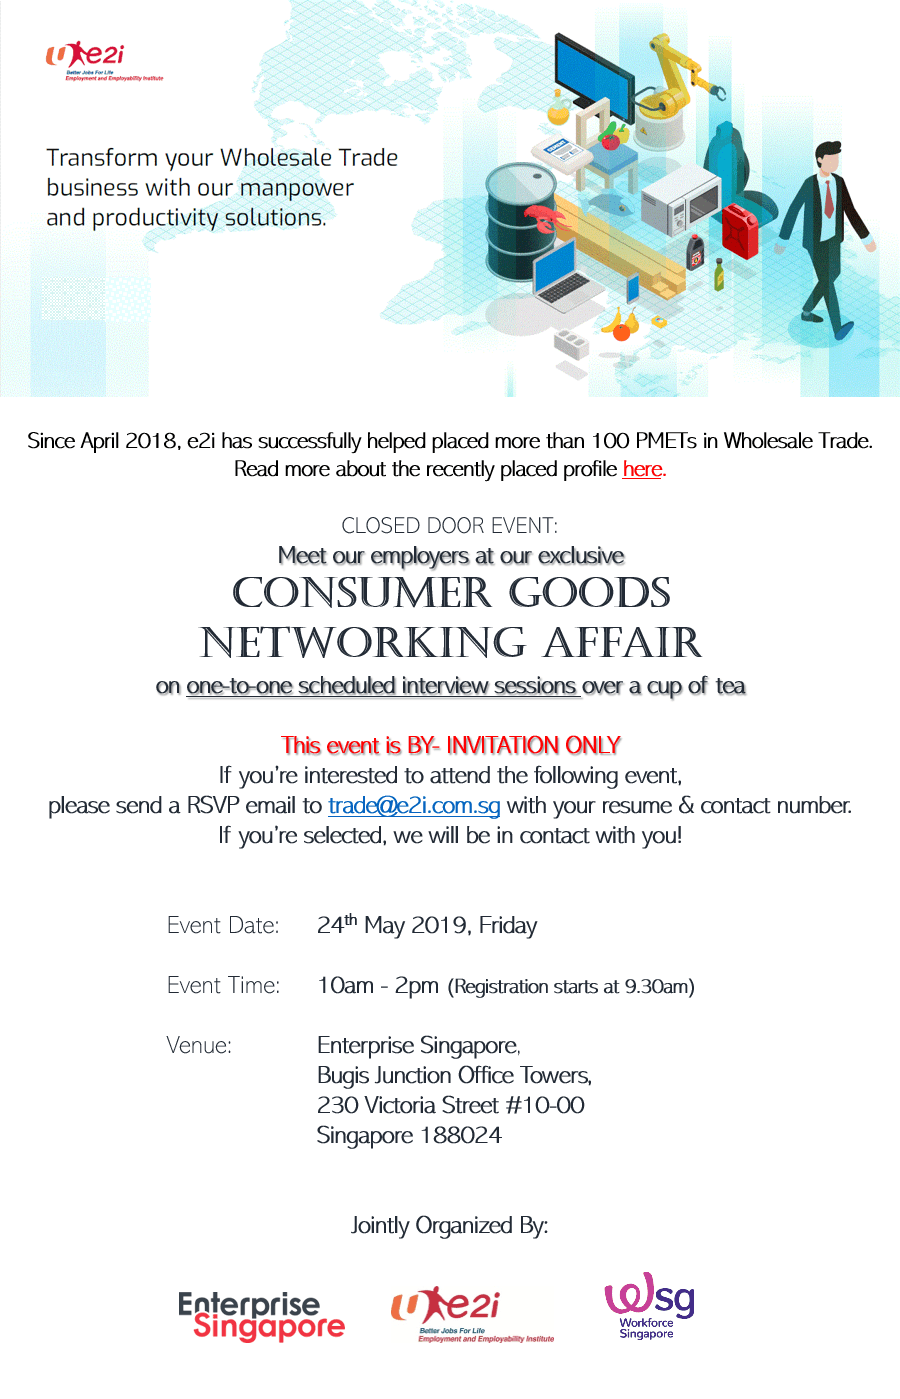 Trade in Style: Networking Event for Consumer Goods Industry